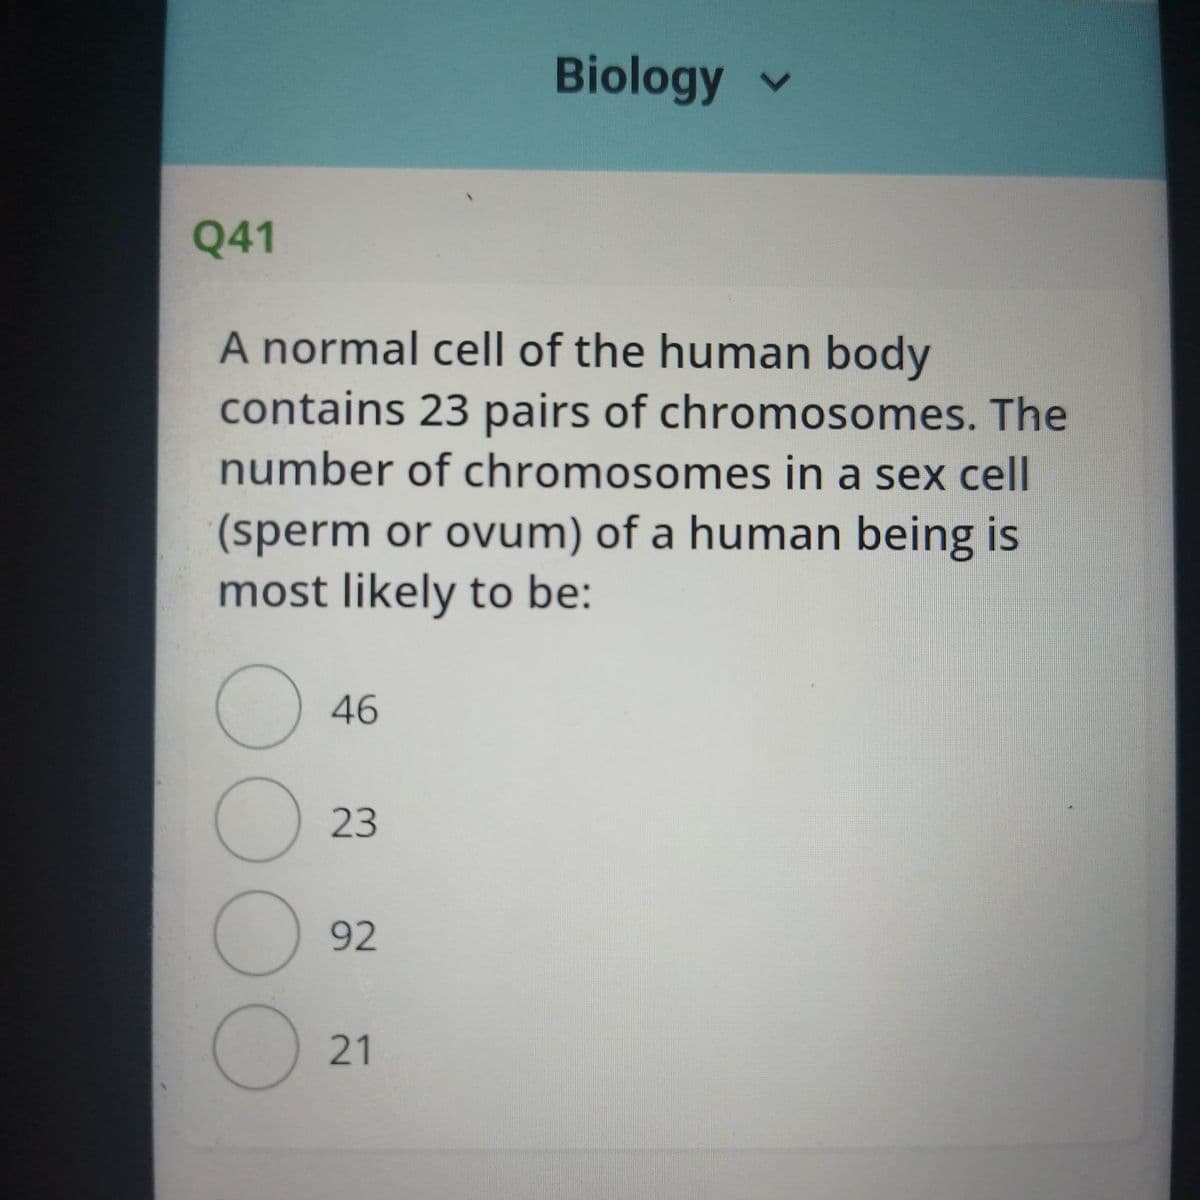 Biology v
Q41
A normal cell of the human body
contains 23 pairs of chromosomes. The
number of chromosomes in a sex cell
(sperm or ovum) of a human being is
most likely to be:
46
23
92
21
00OO
